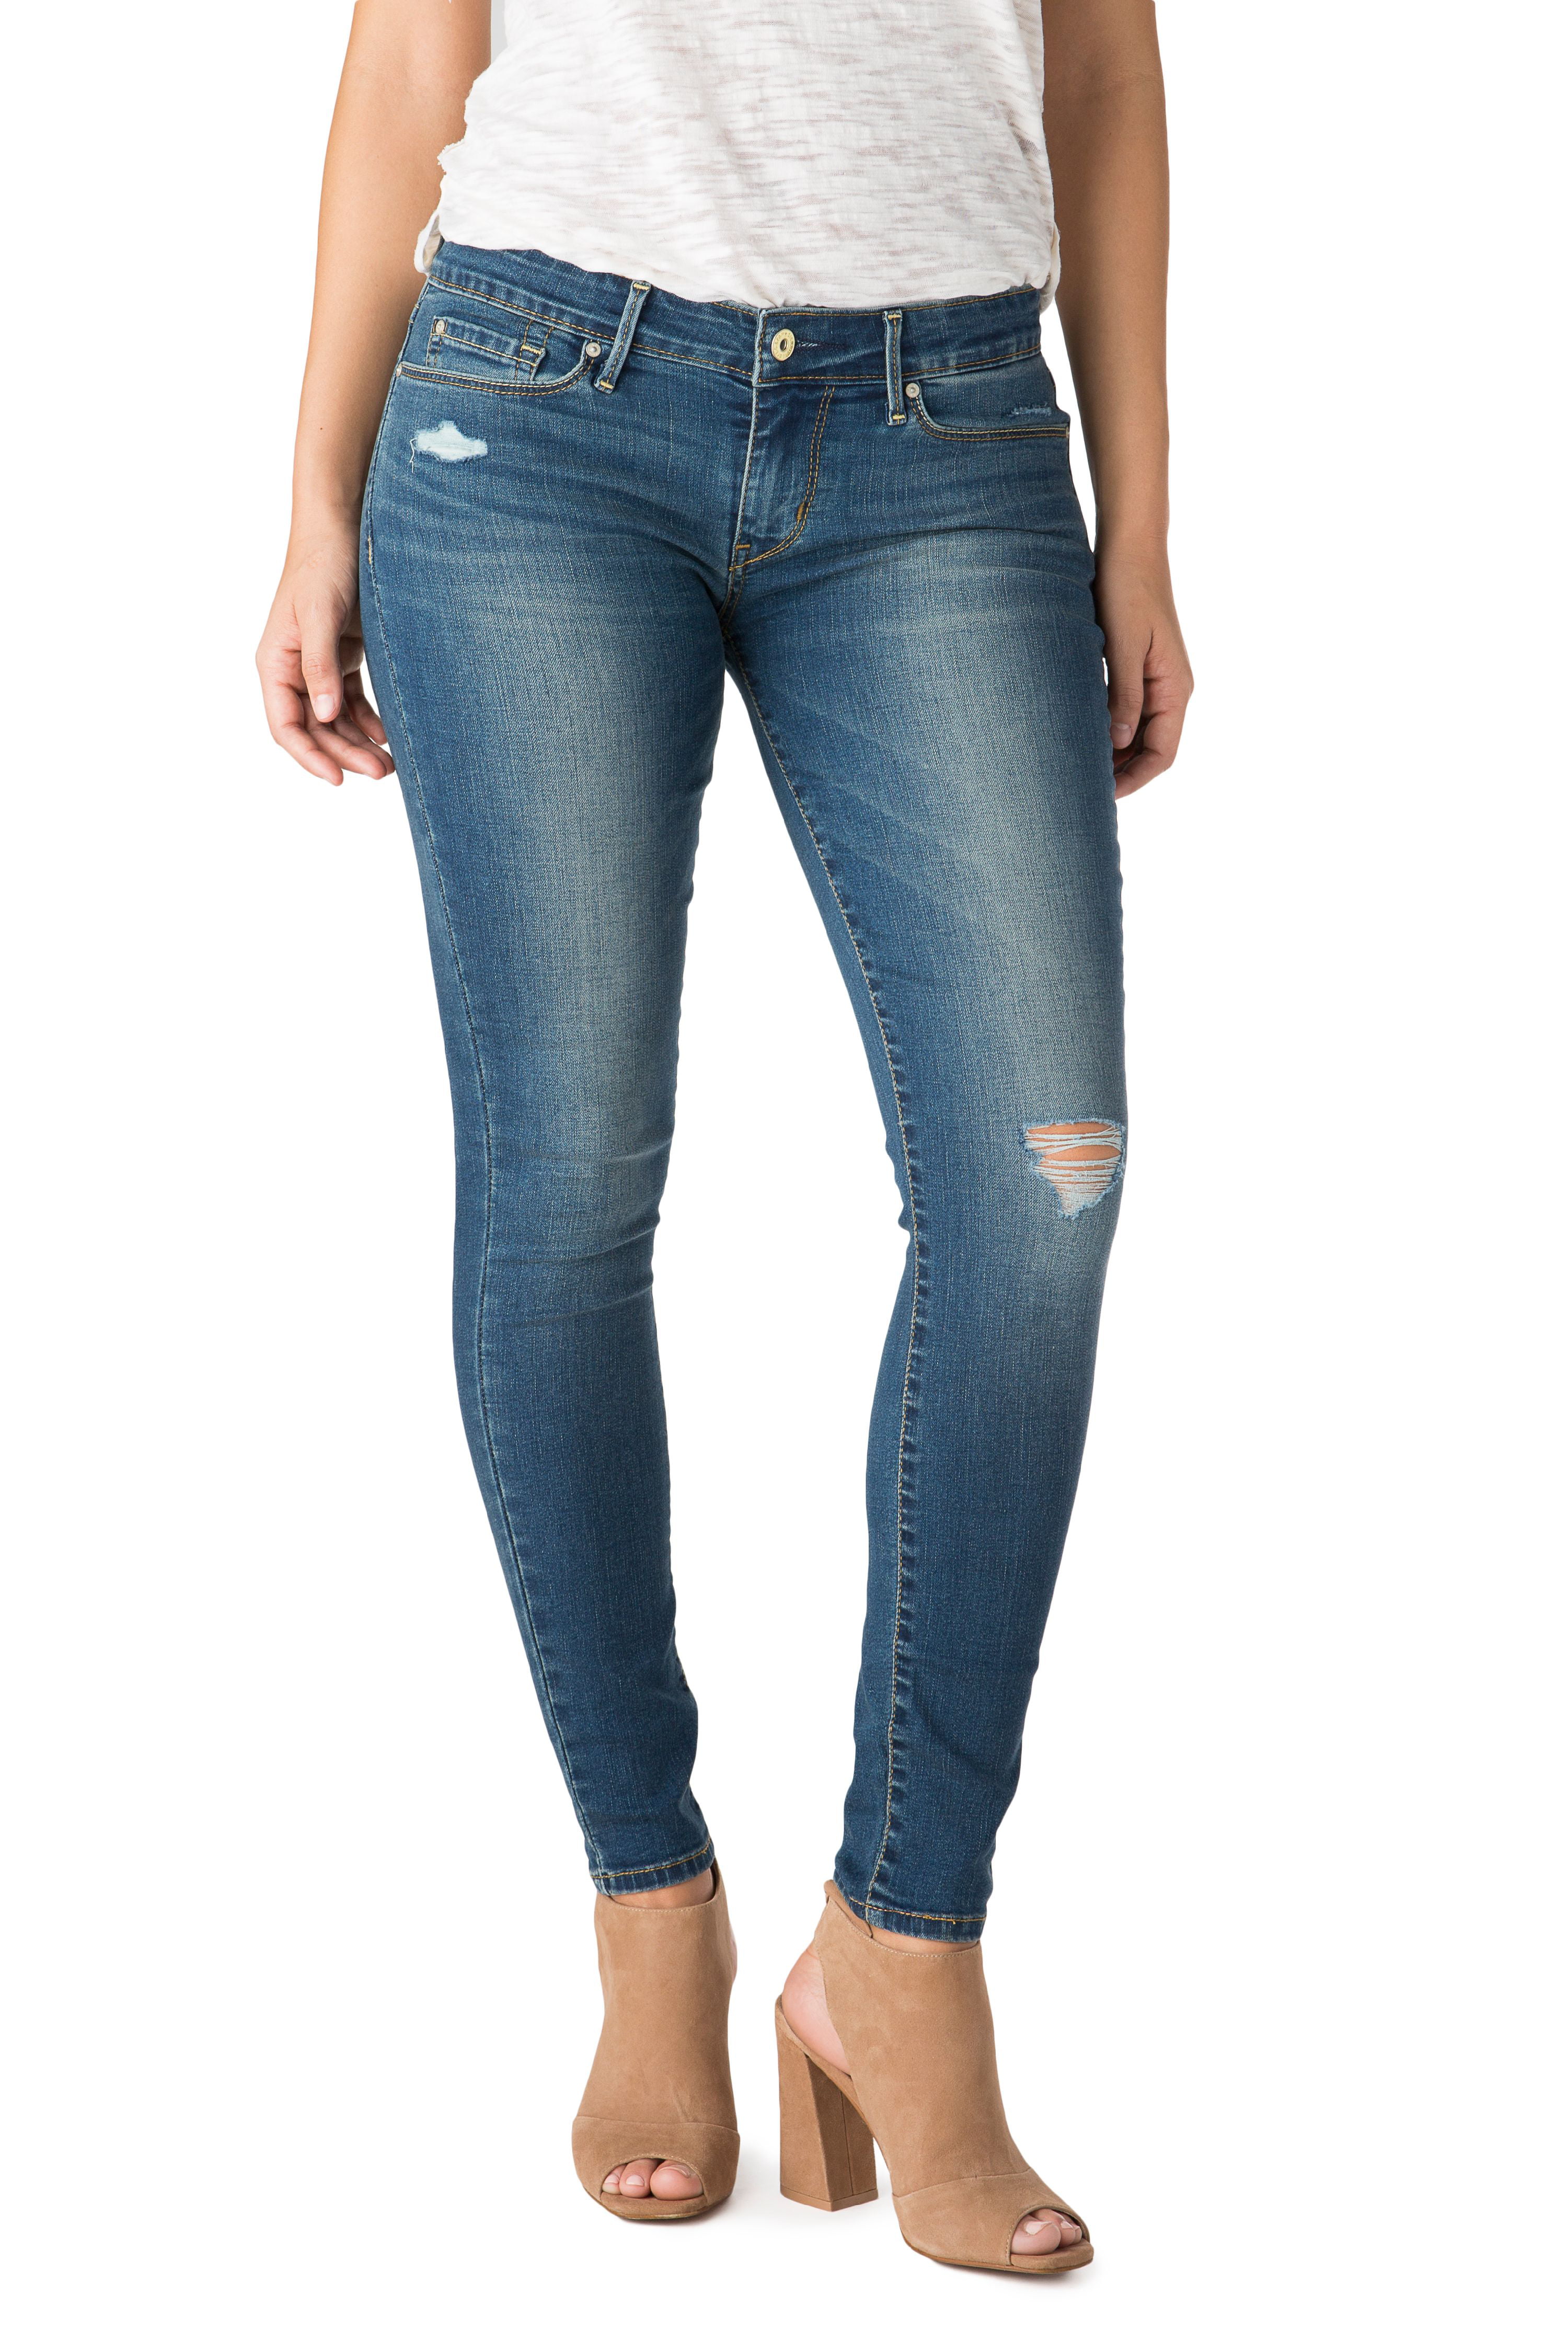 Levi's Low Rise Jeggings Hotsell, SAVE 30% 